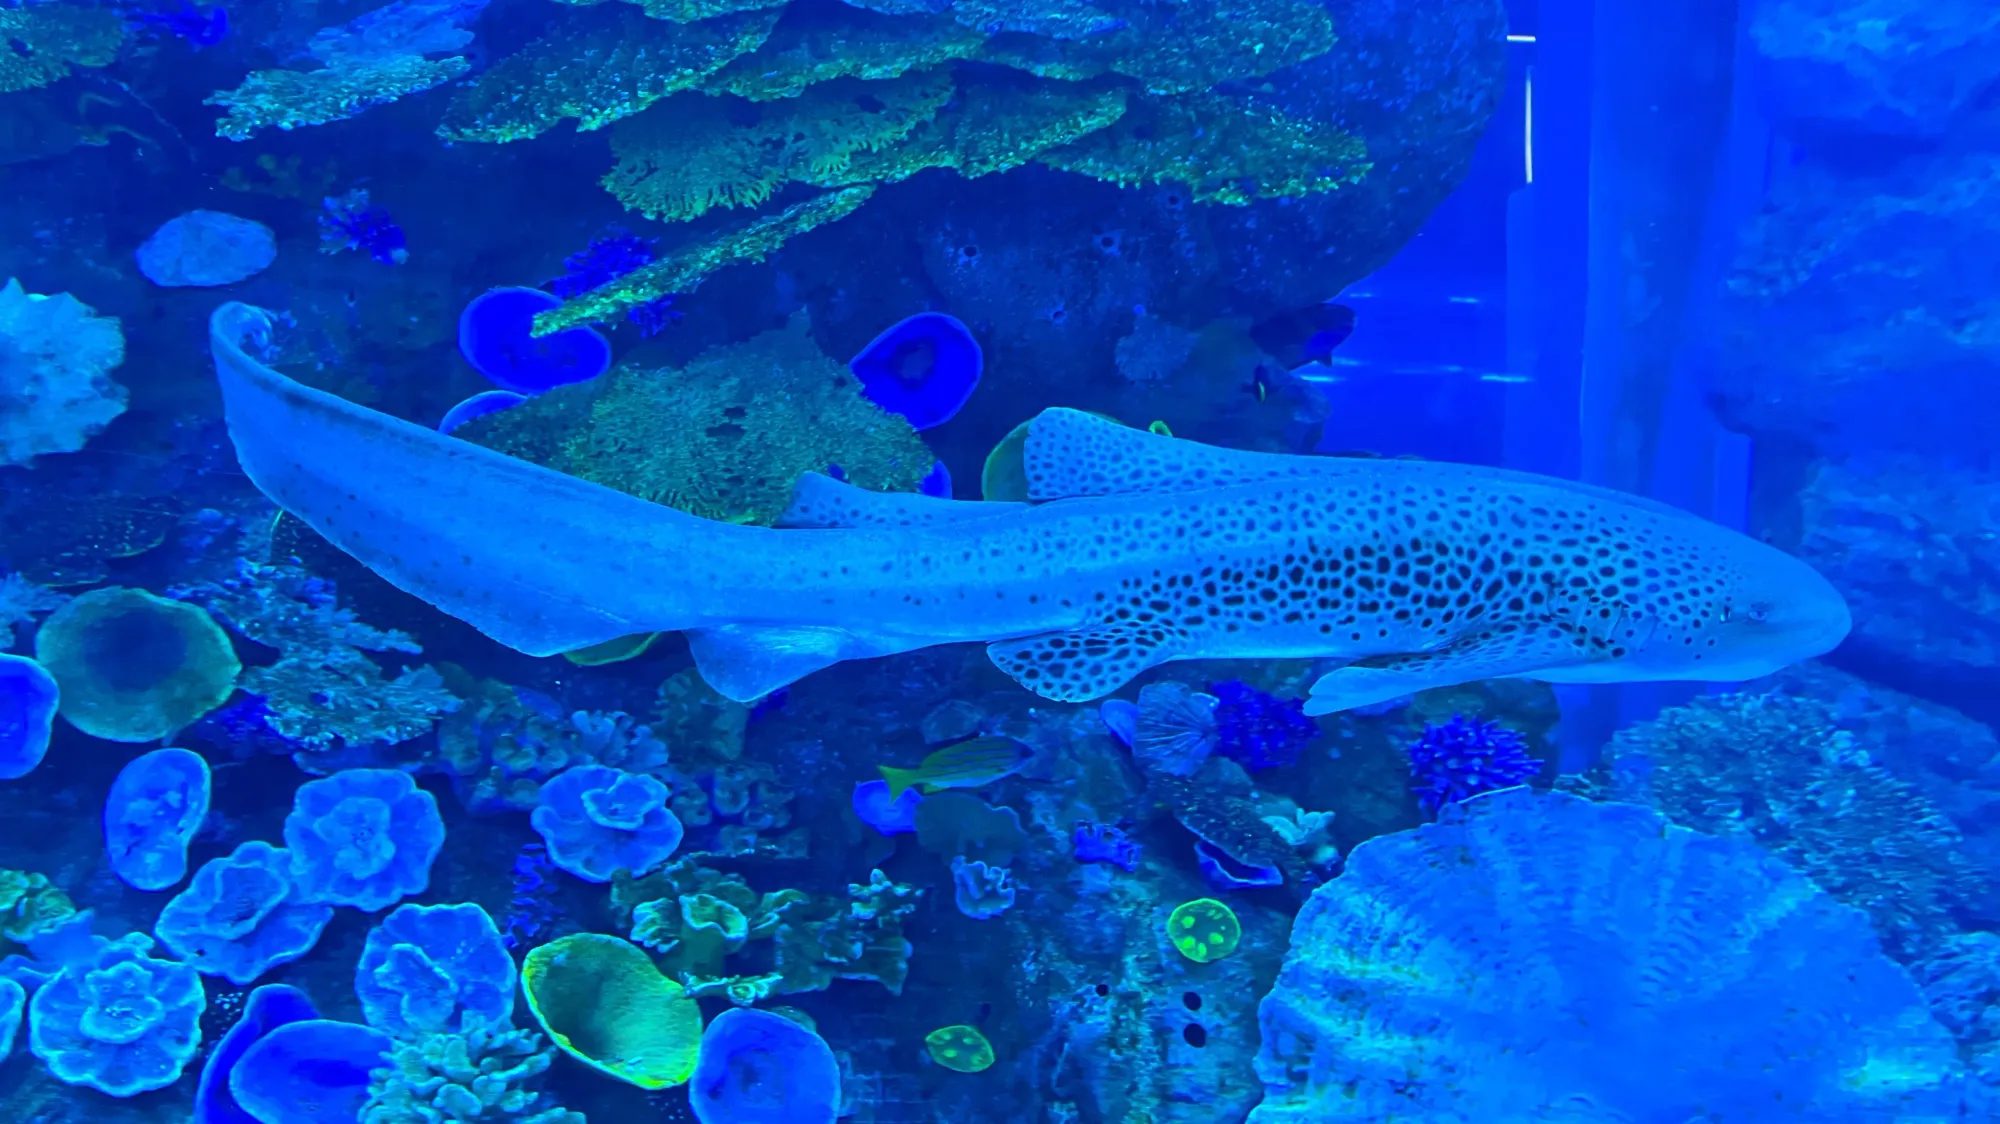 Shark swimming within the Dubai Aquarium, tinted blue from the water